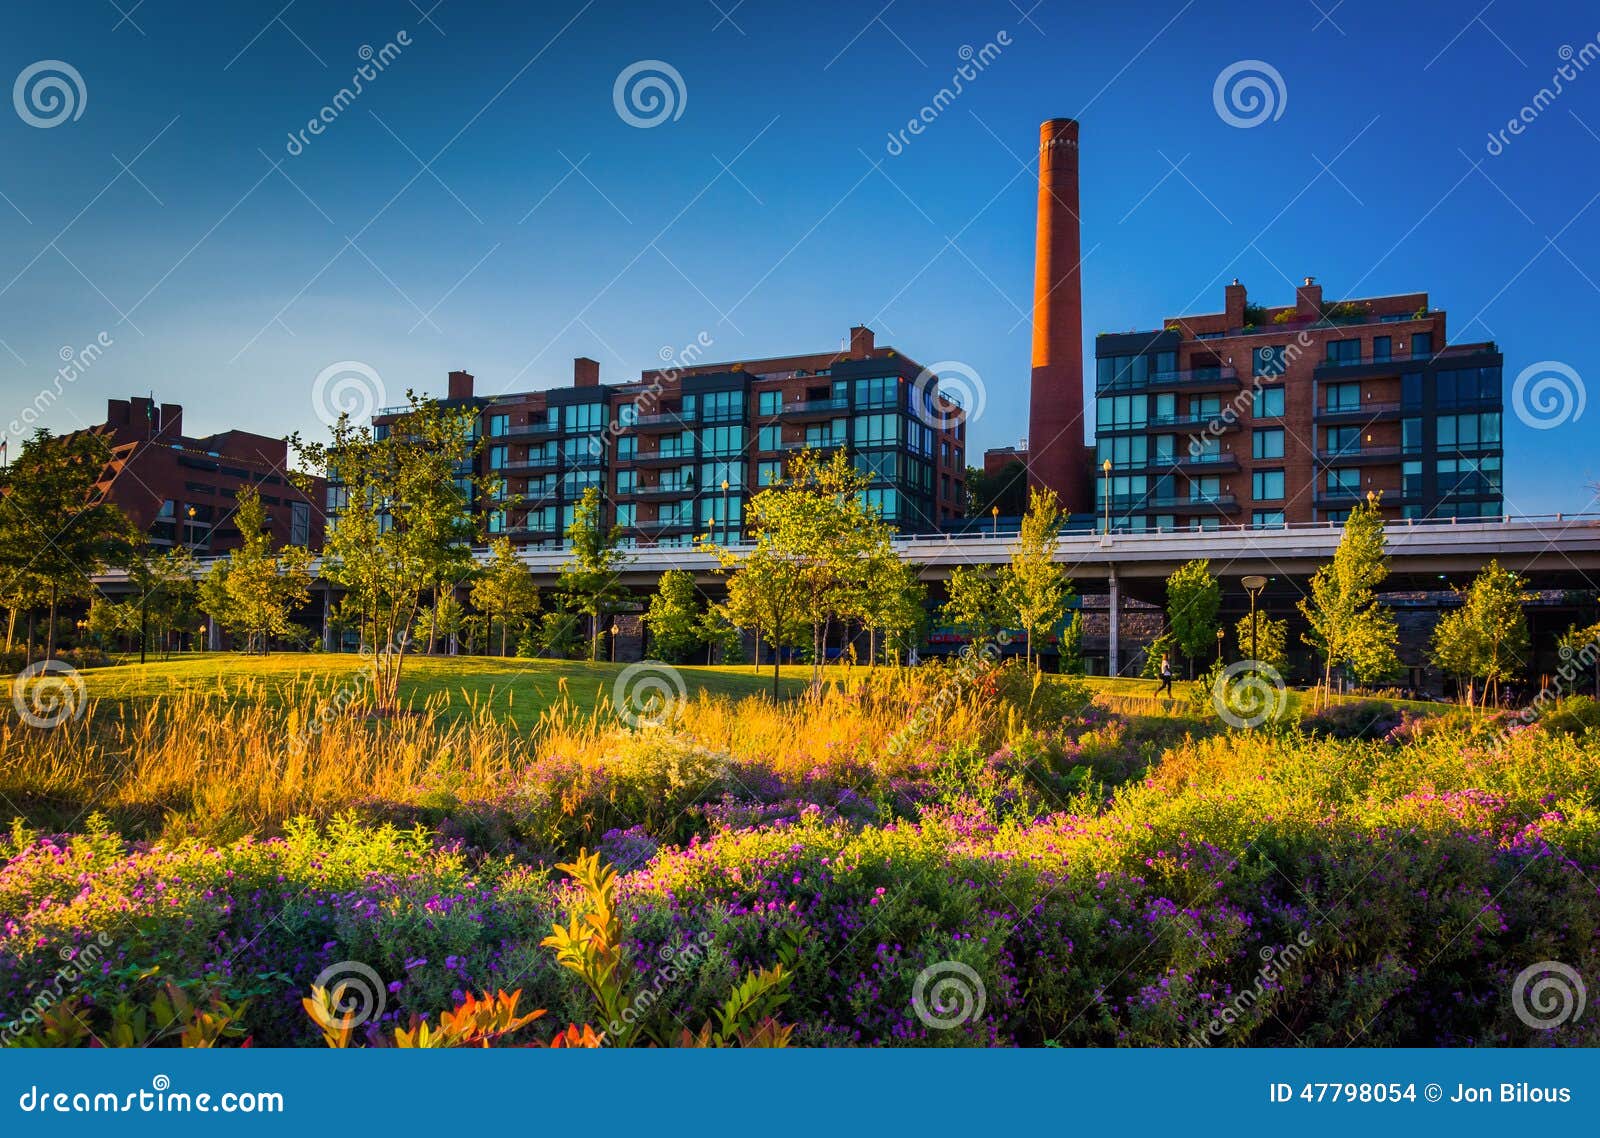 garden and view of the smokestack in georgetown, washington, dc.